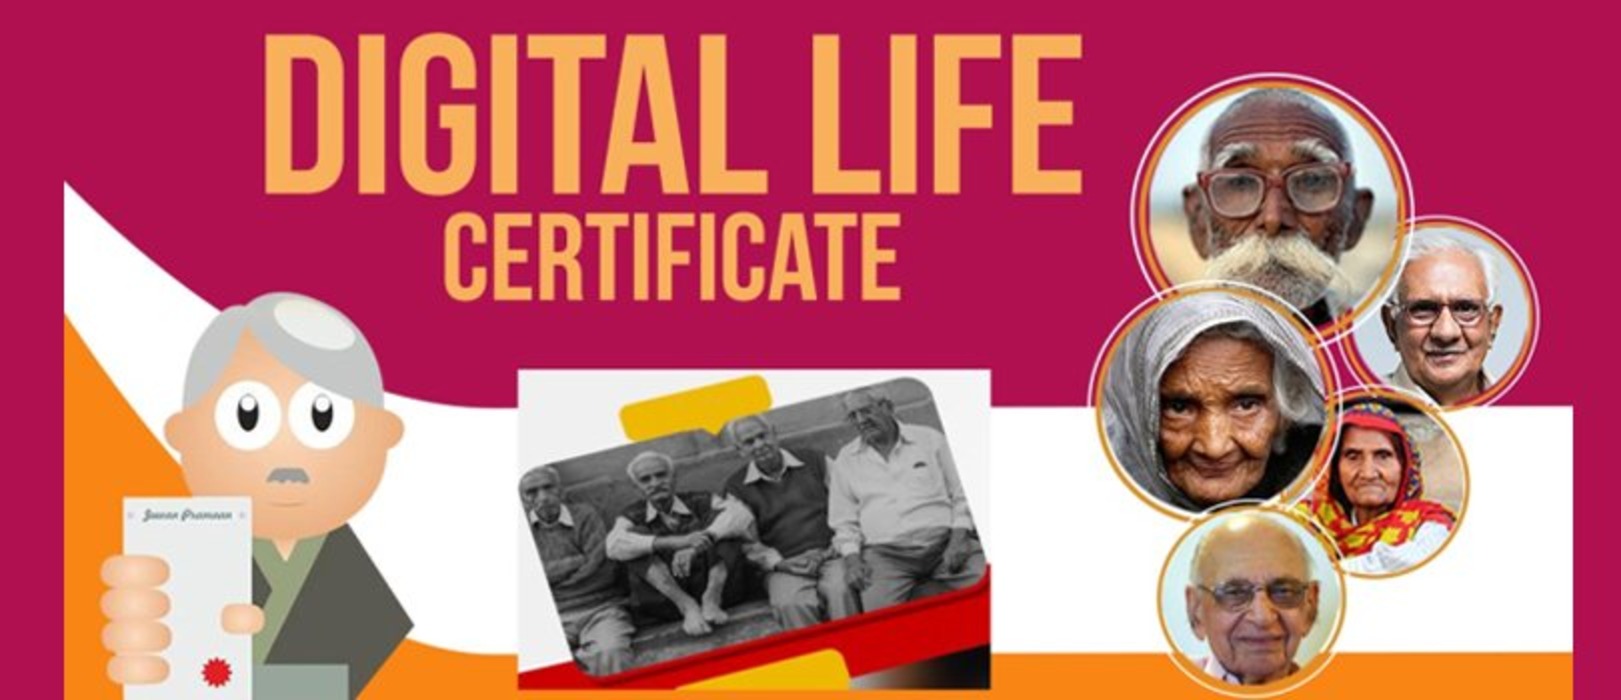 Digital Life Certificate through Video based Customer Identification Process and Facial recognition technologies: Action Taken Report